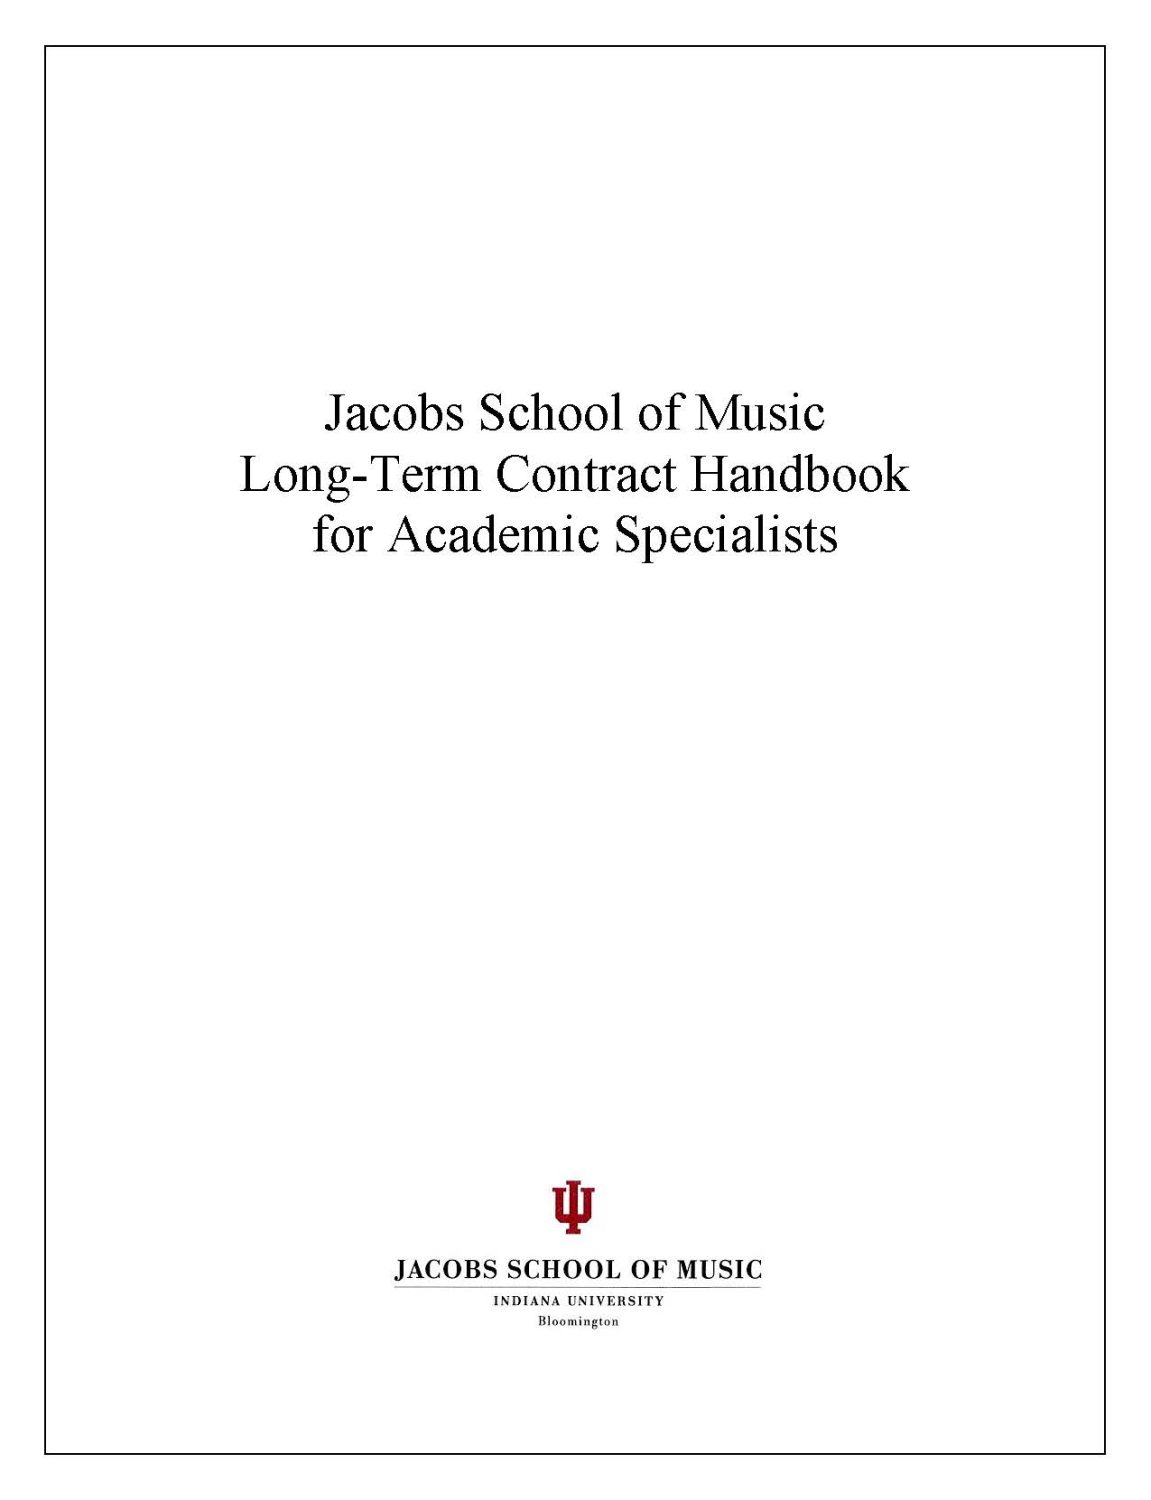 Cover image for Jacobs School of Music Long-Term Contract Handbook for Academic Specialists